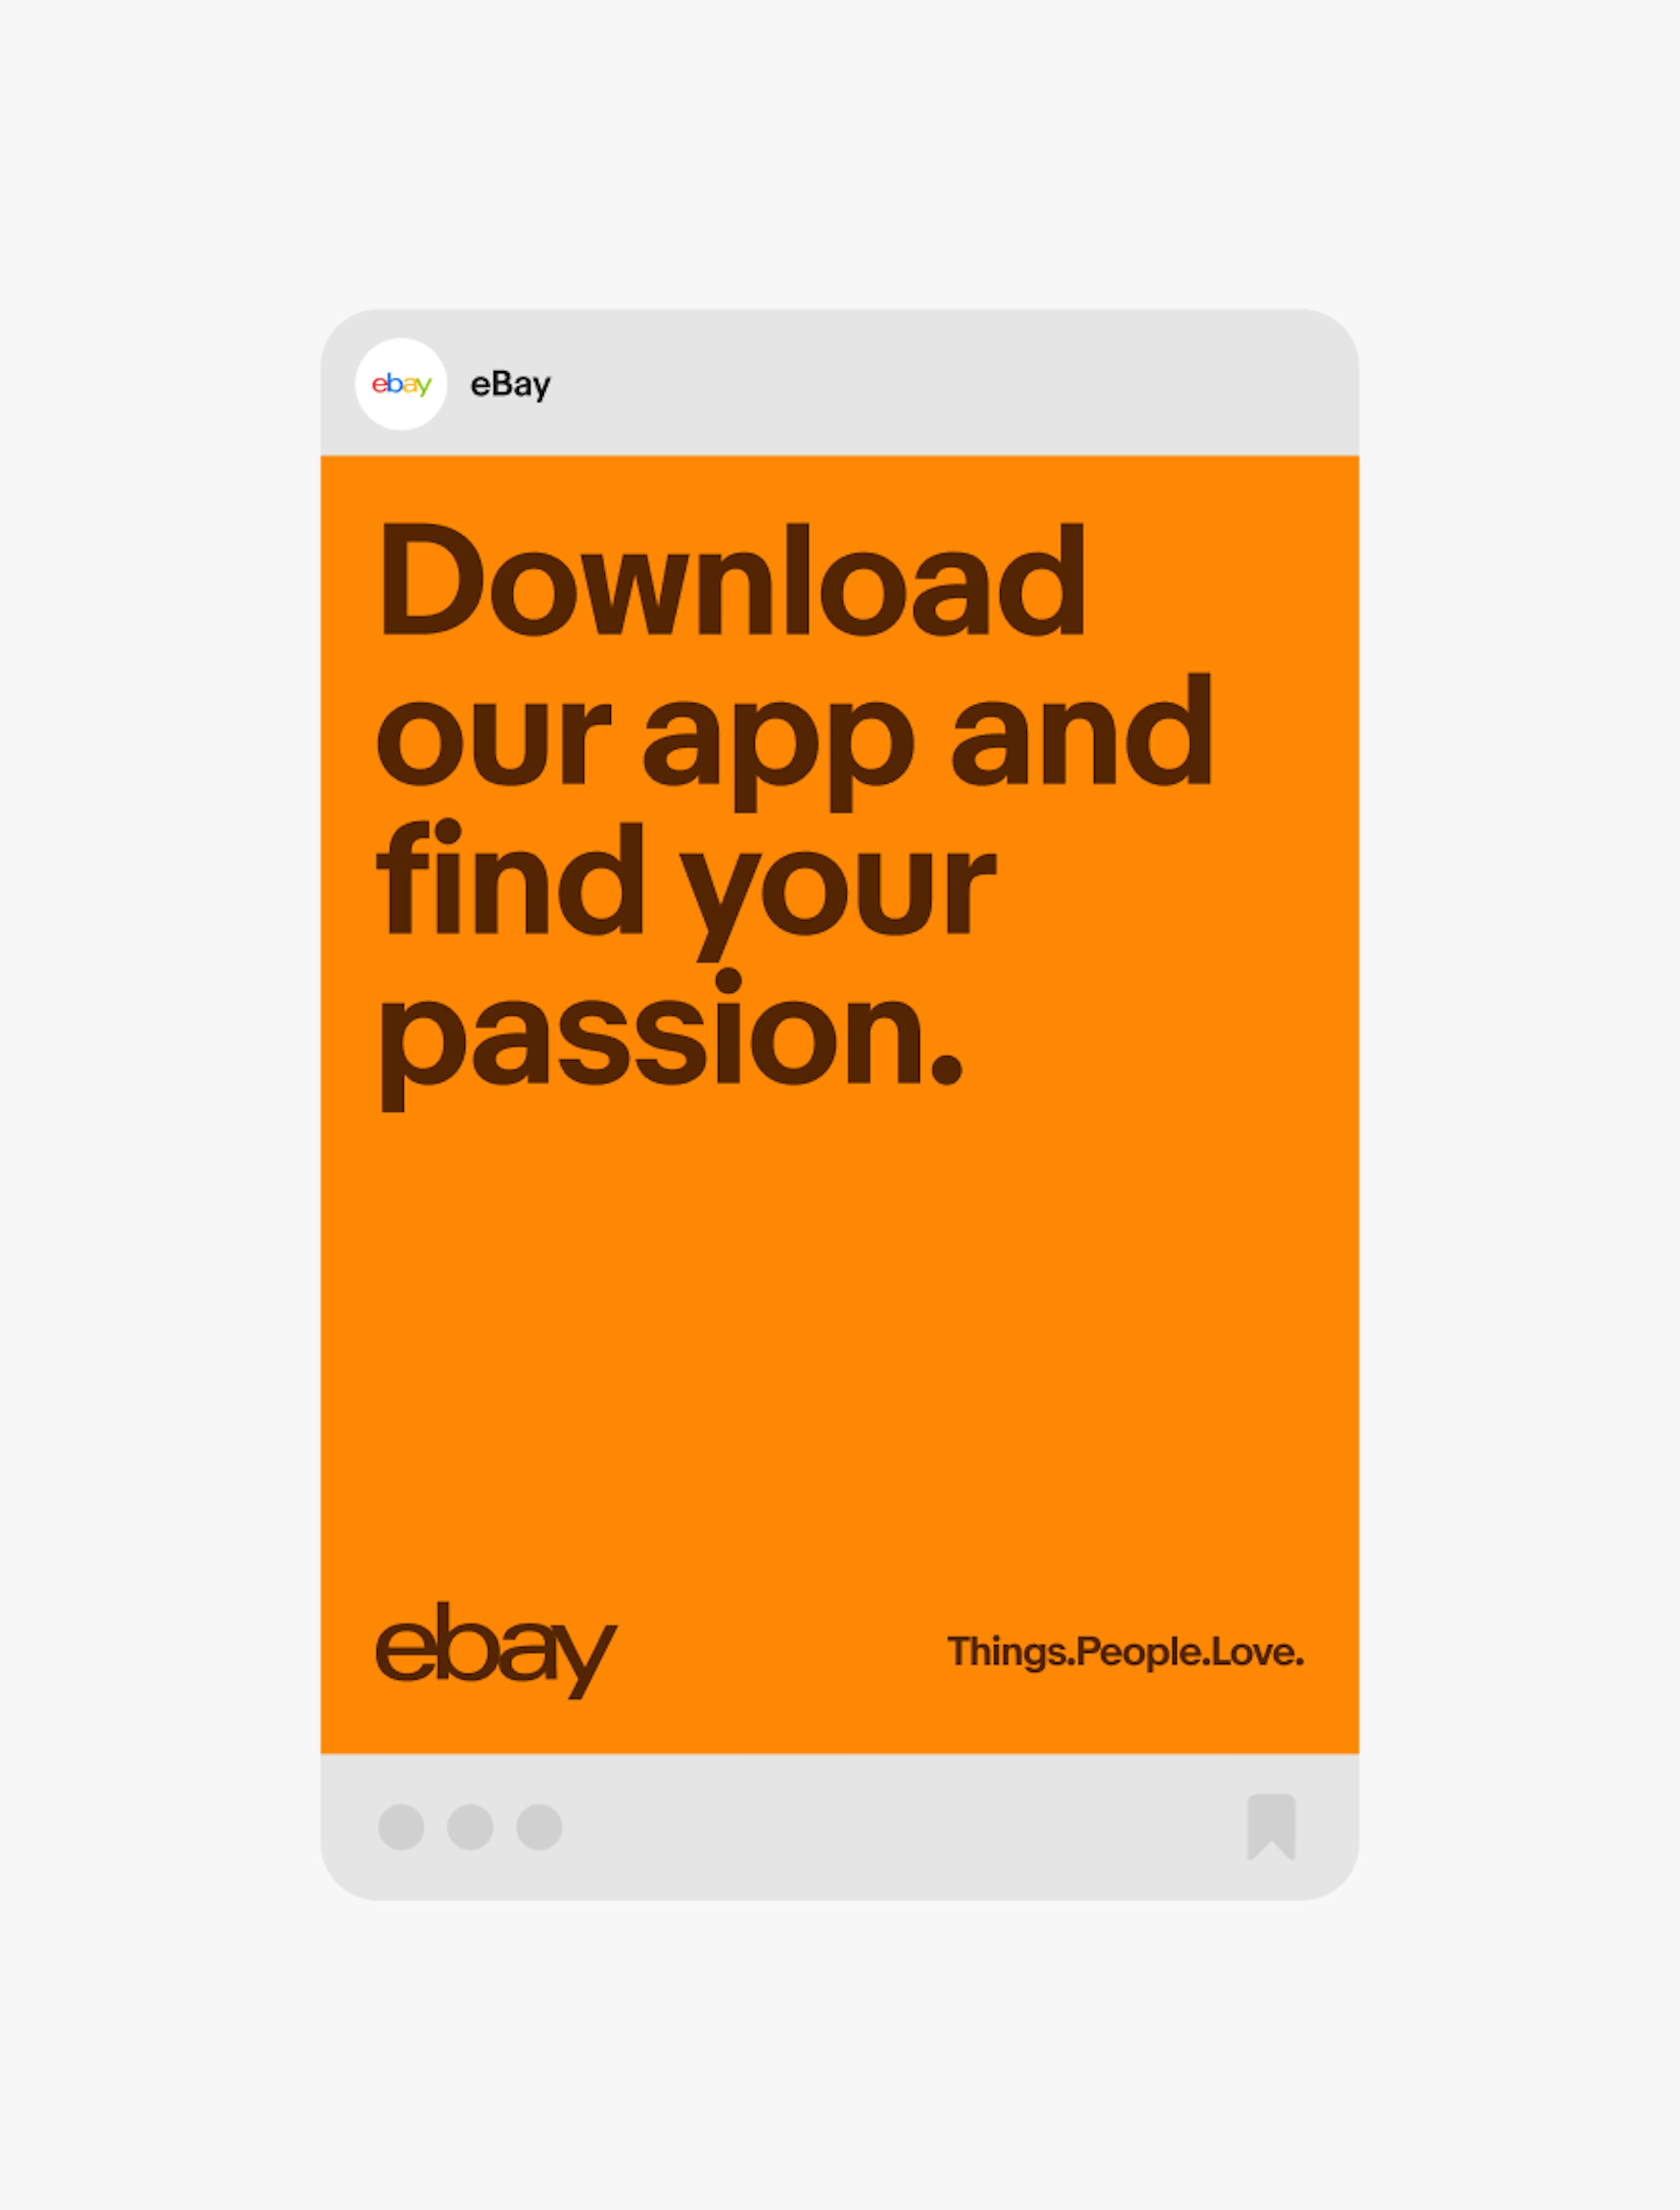 A social media ad with a vibrant orange background. The headline is “Download our app and find your passion.”